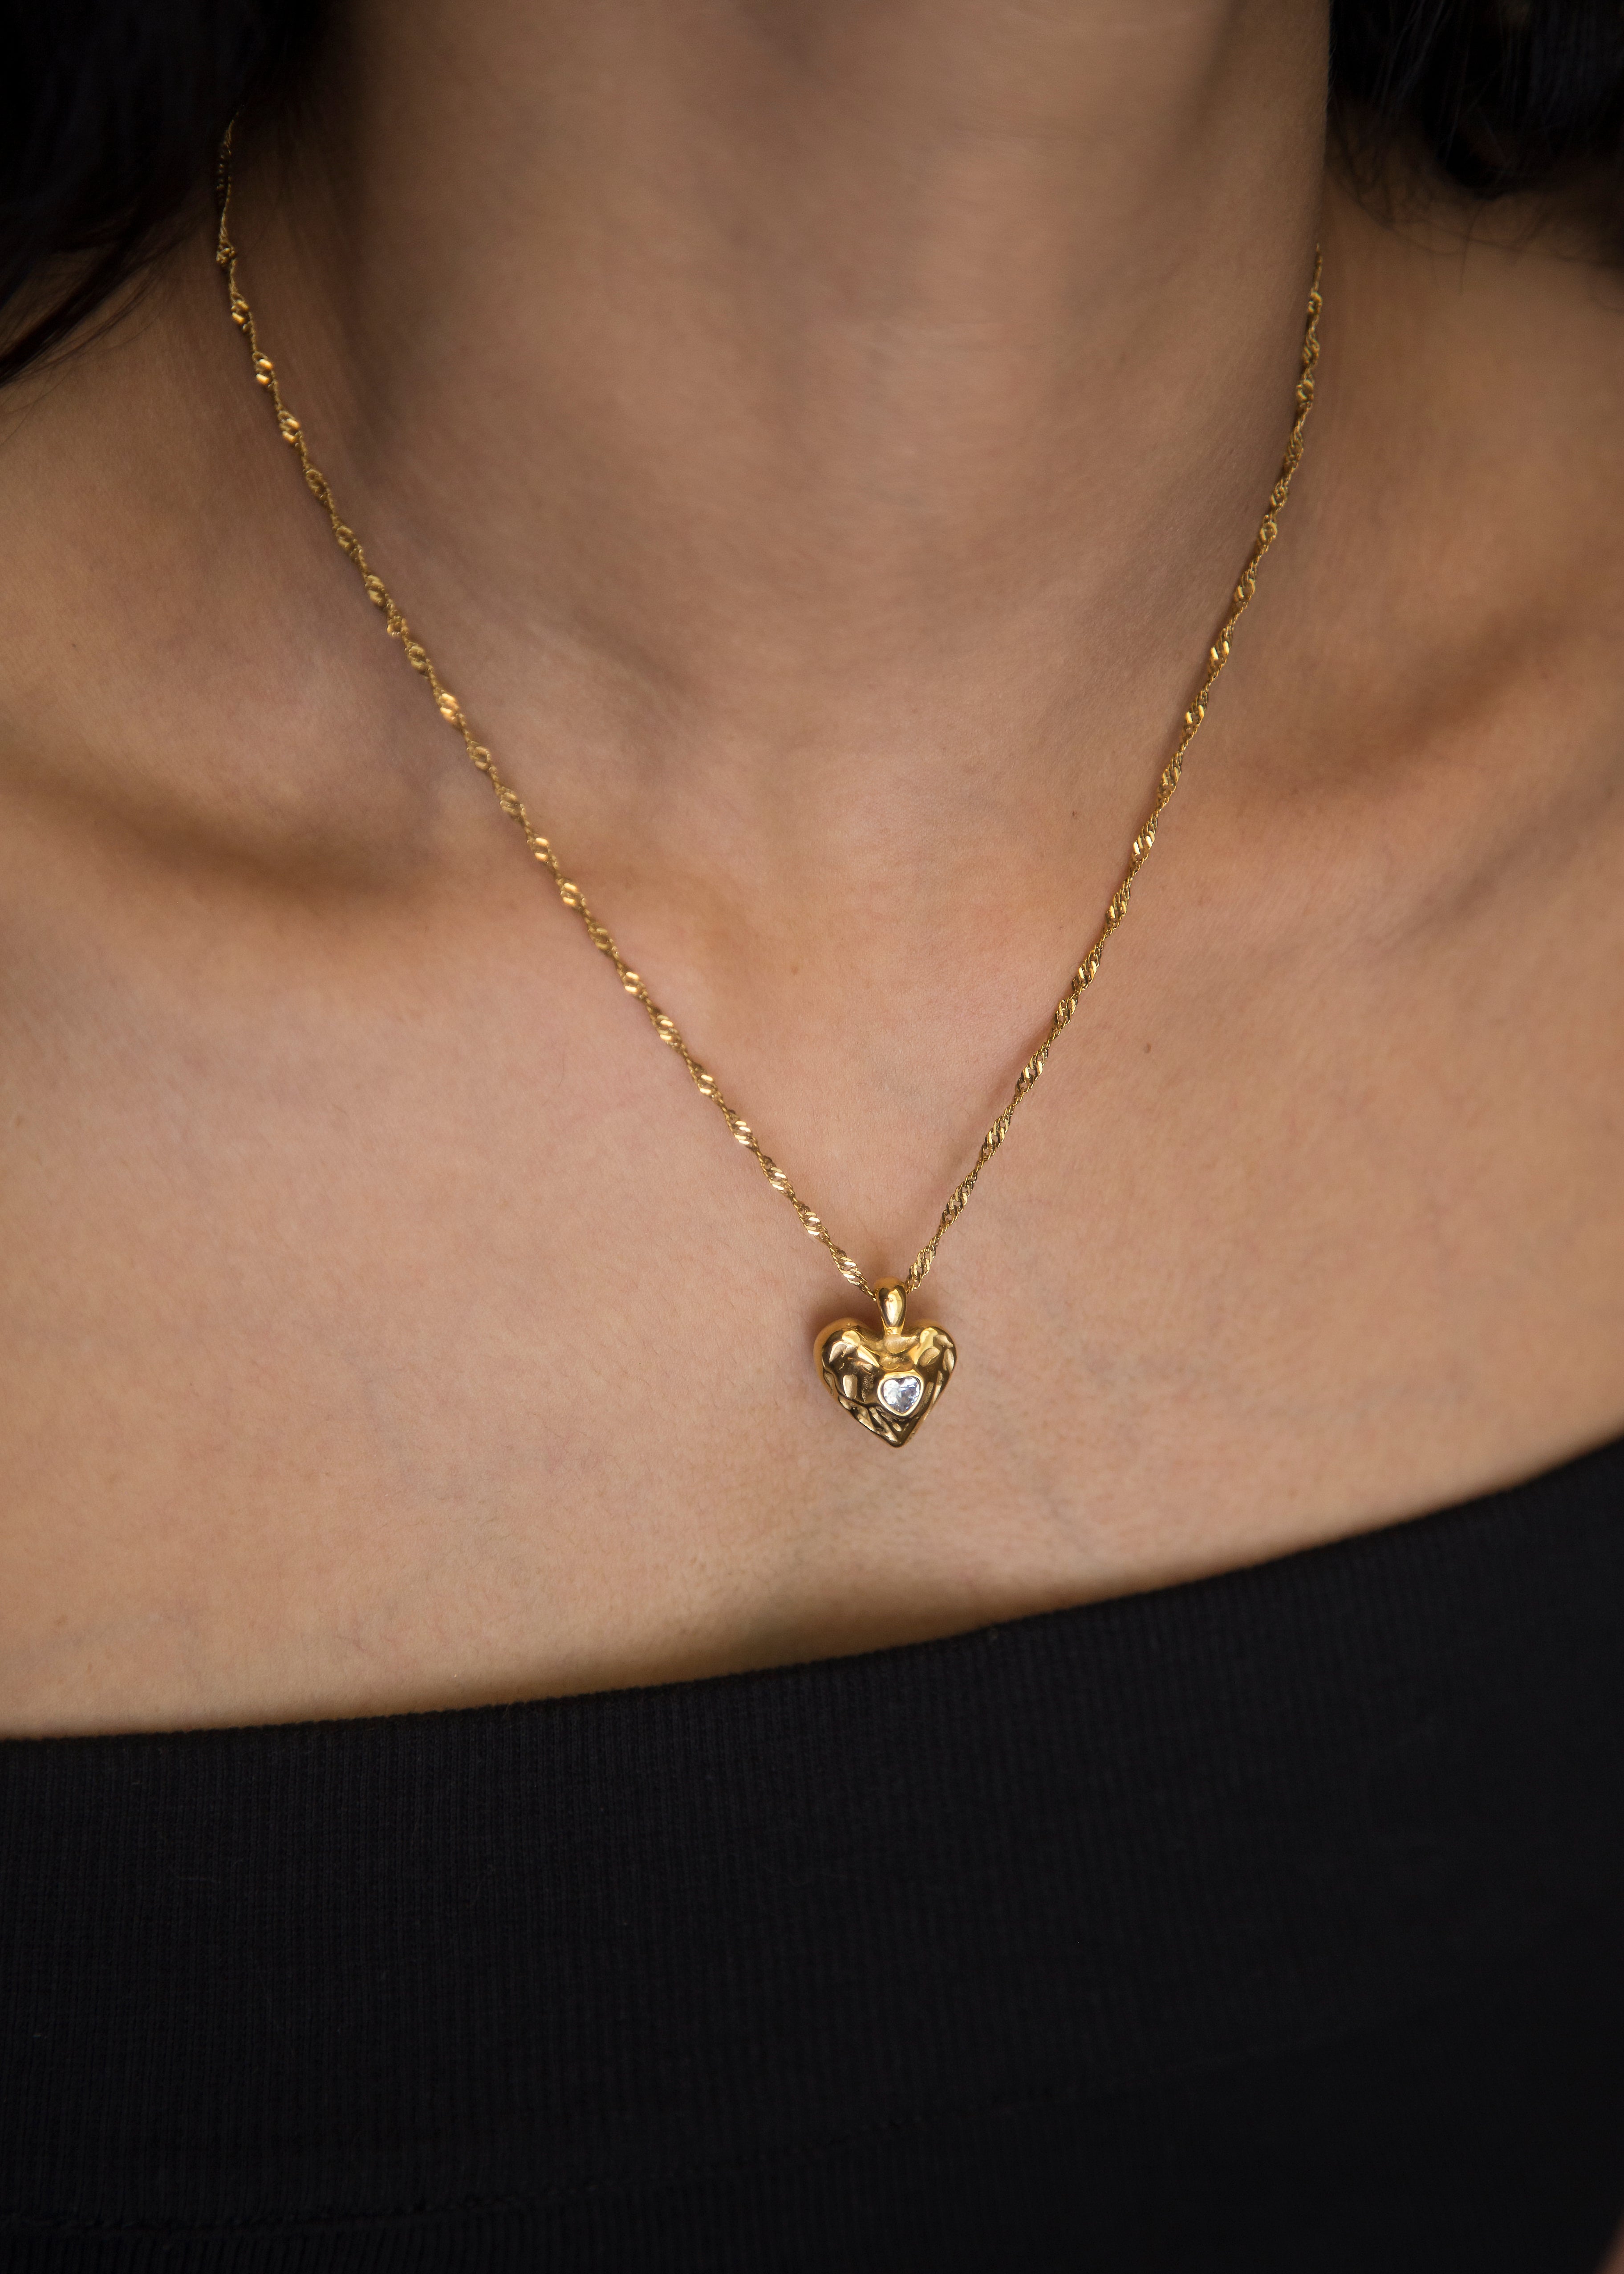 This stunning pendant, adorned with a cubic zircon at its center, boasts a hammered texture look that catches the light. The heart shape embodies love and emotion, making it a meaningful addition to your collection. Elevate your style with this exquisite statement piece.